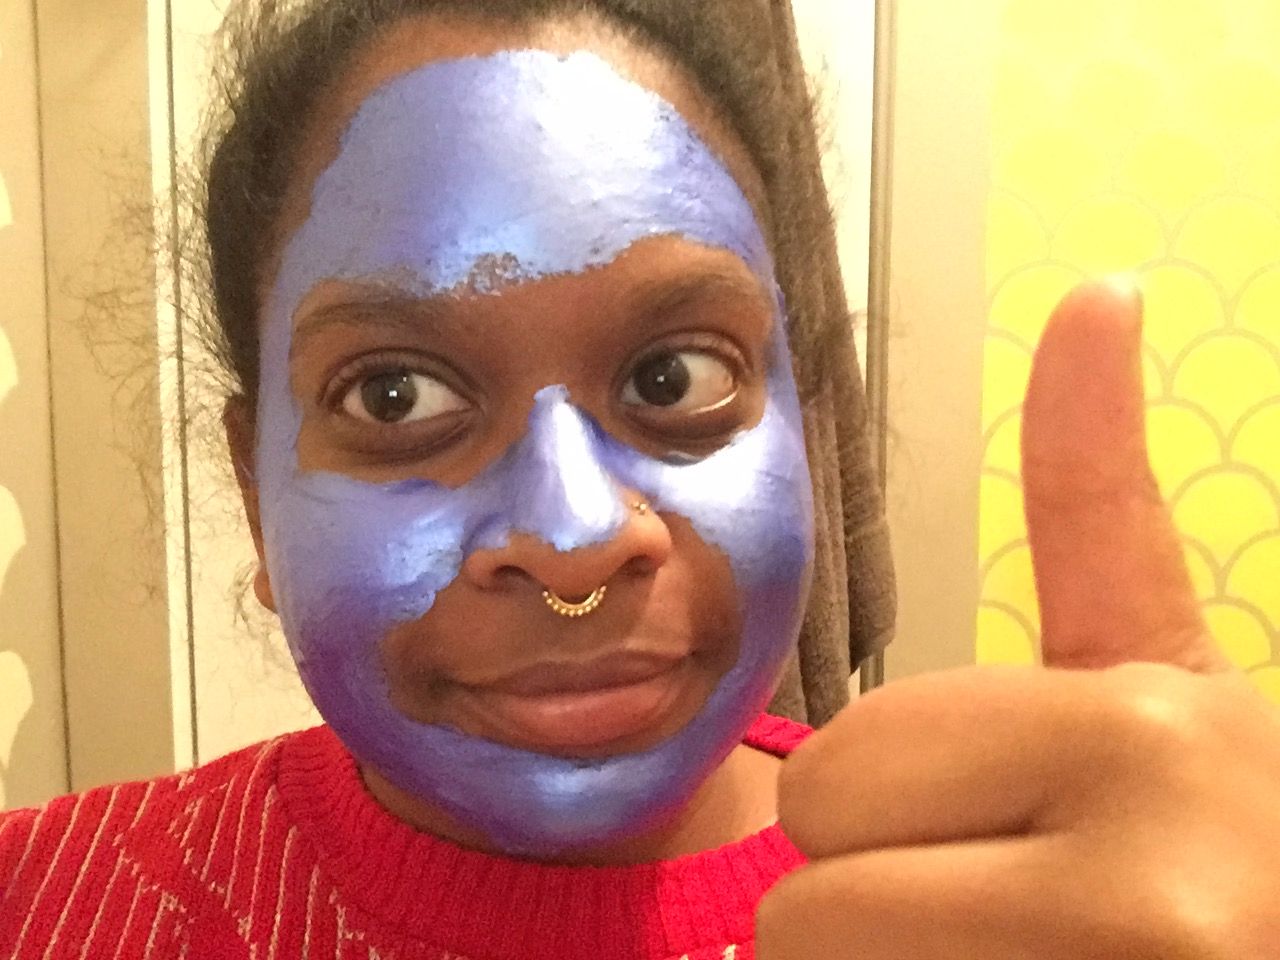 I Tried This $98 Sonic The Hedgehog Face Mask So You Wouldn’t Have To